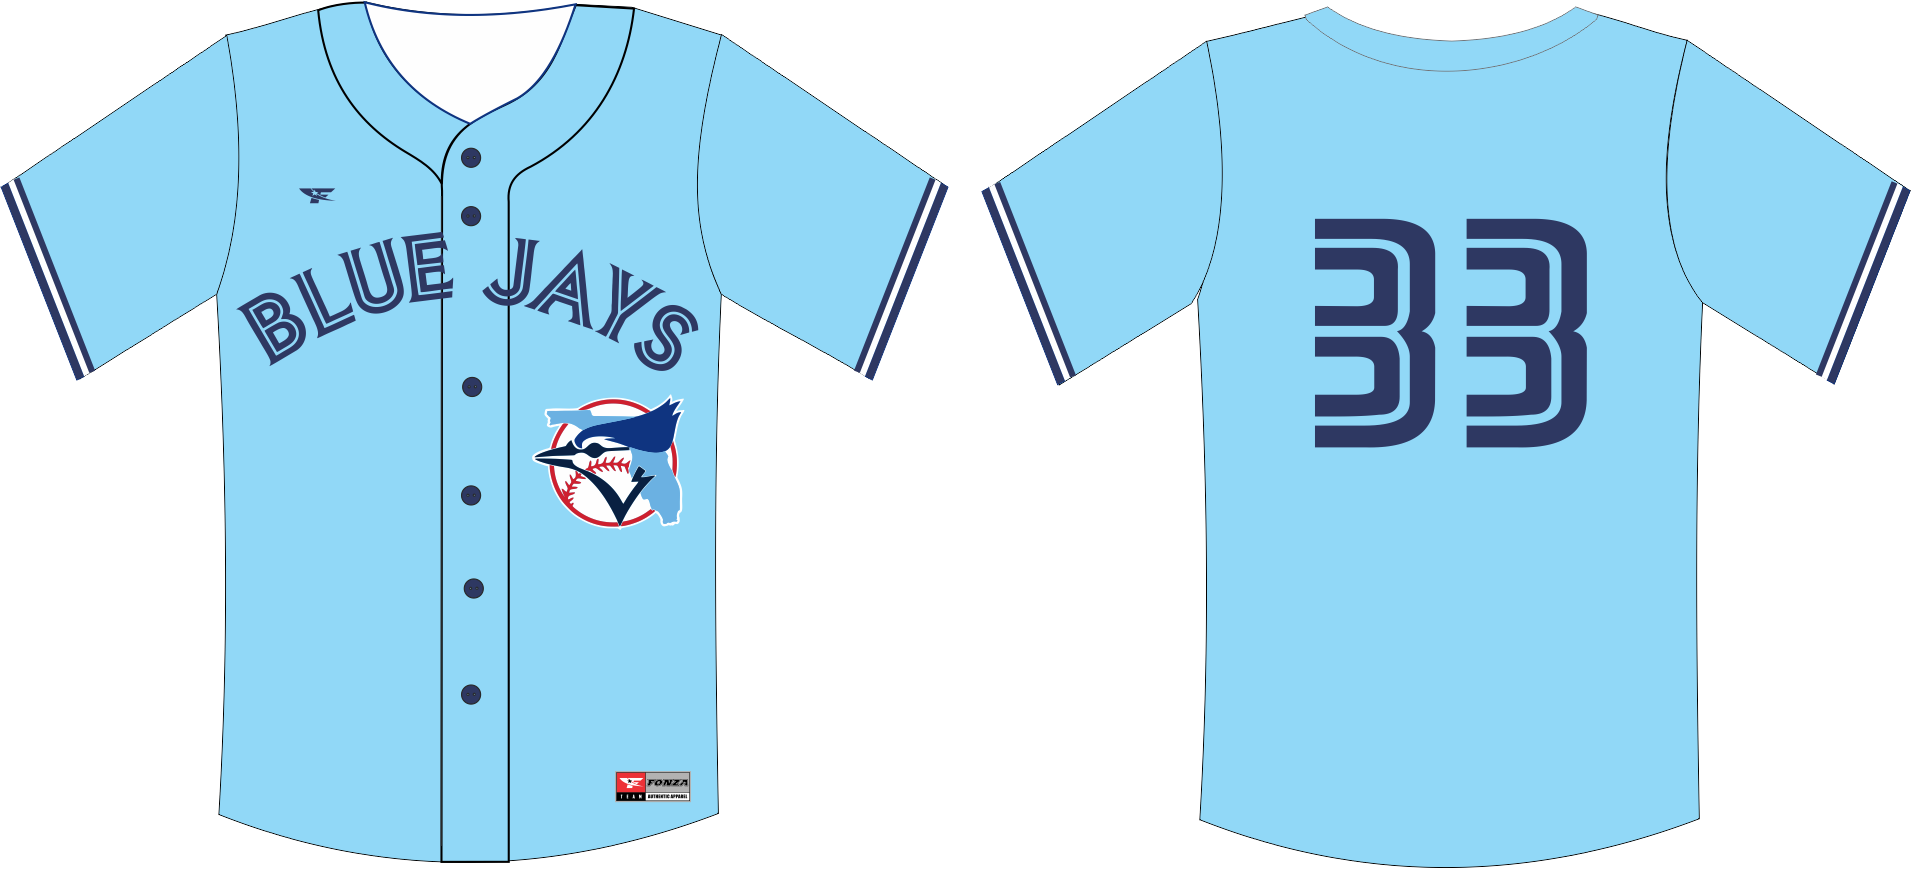 where to buy blue jays jersey